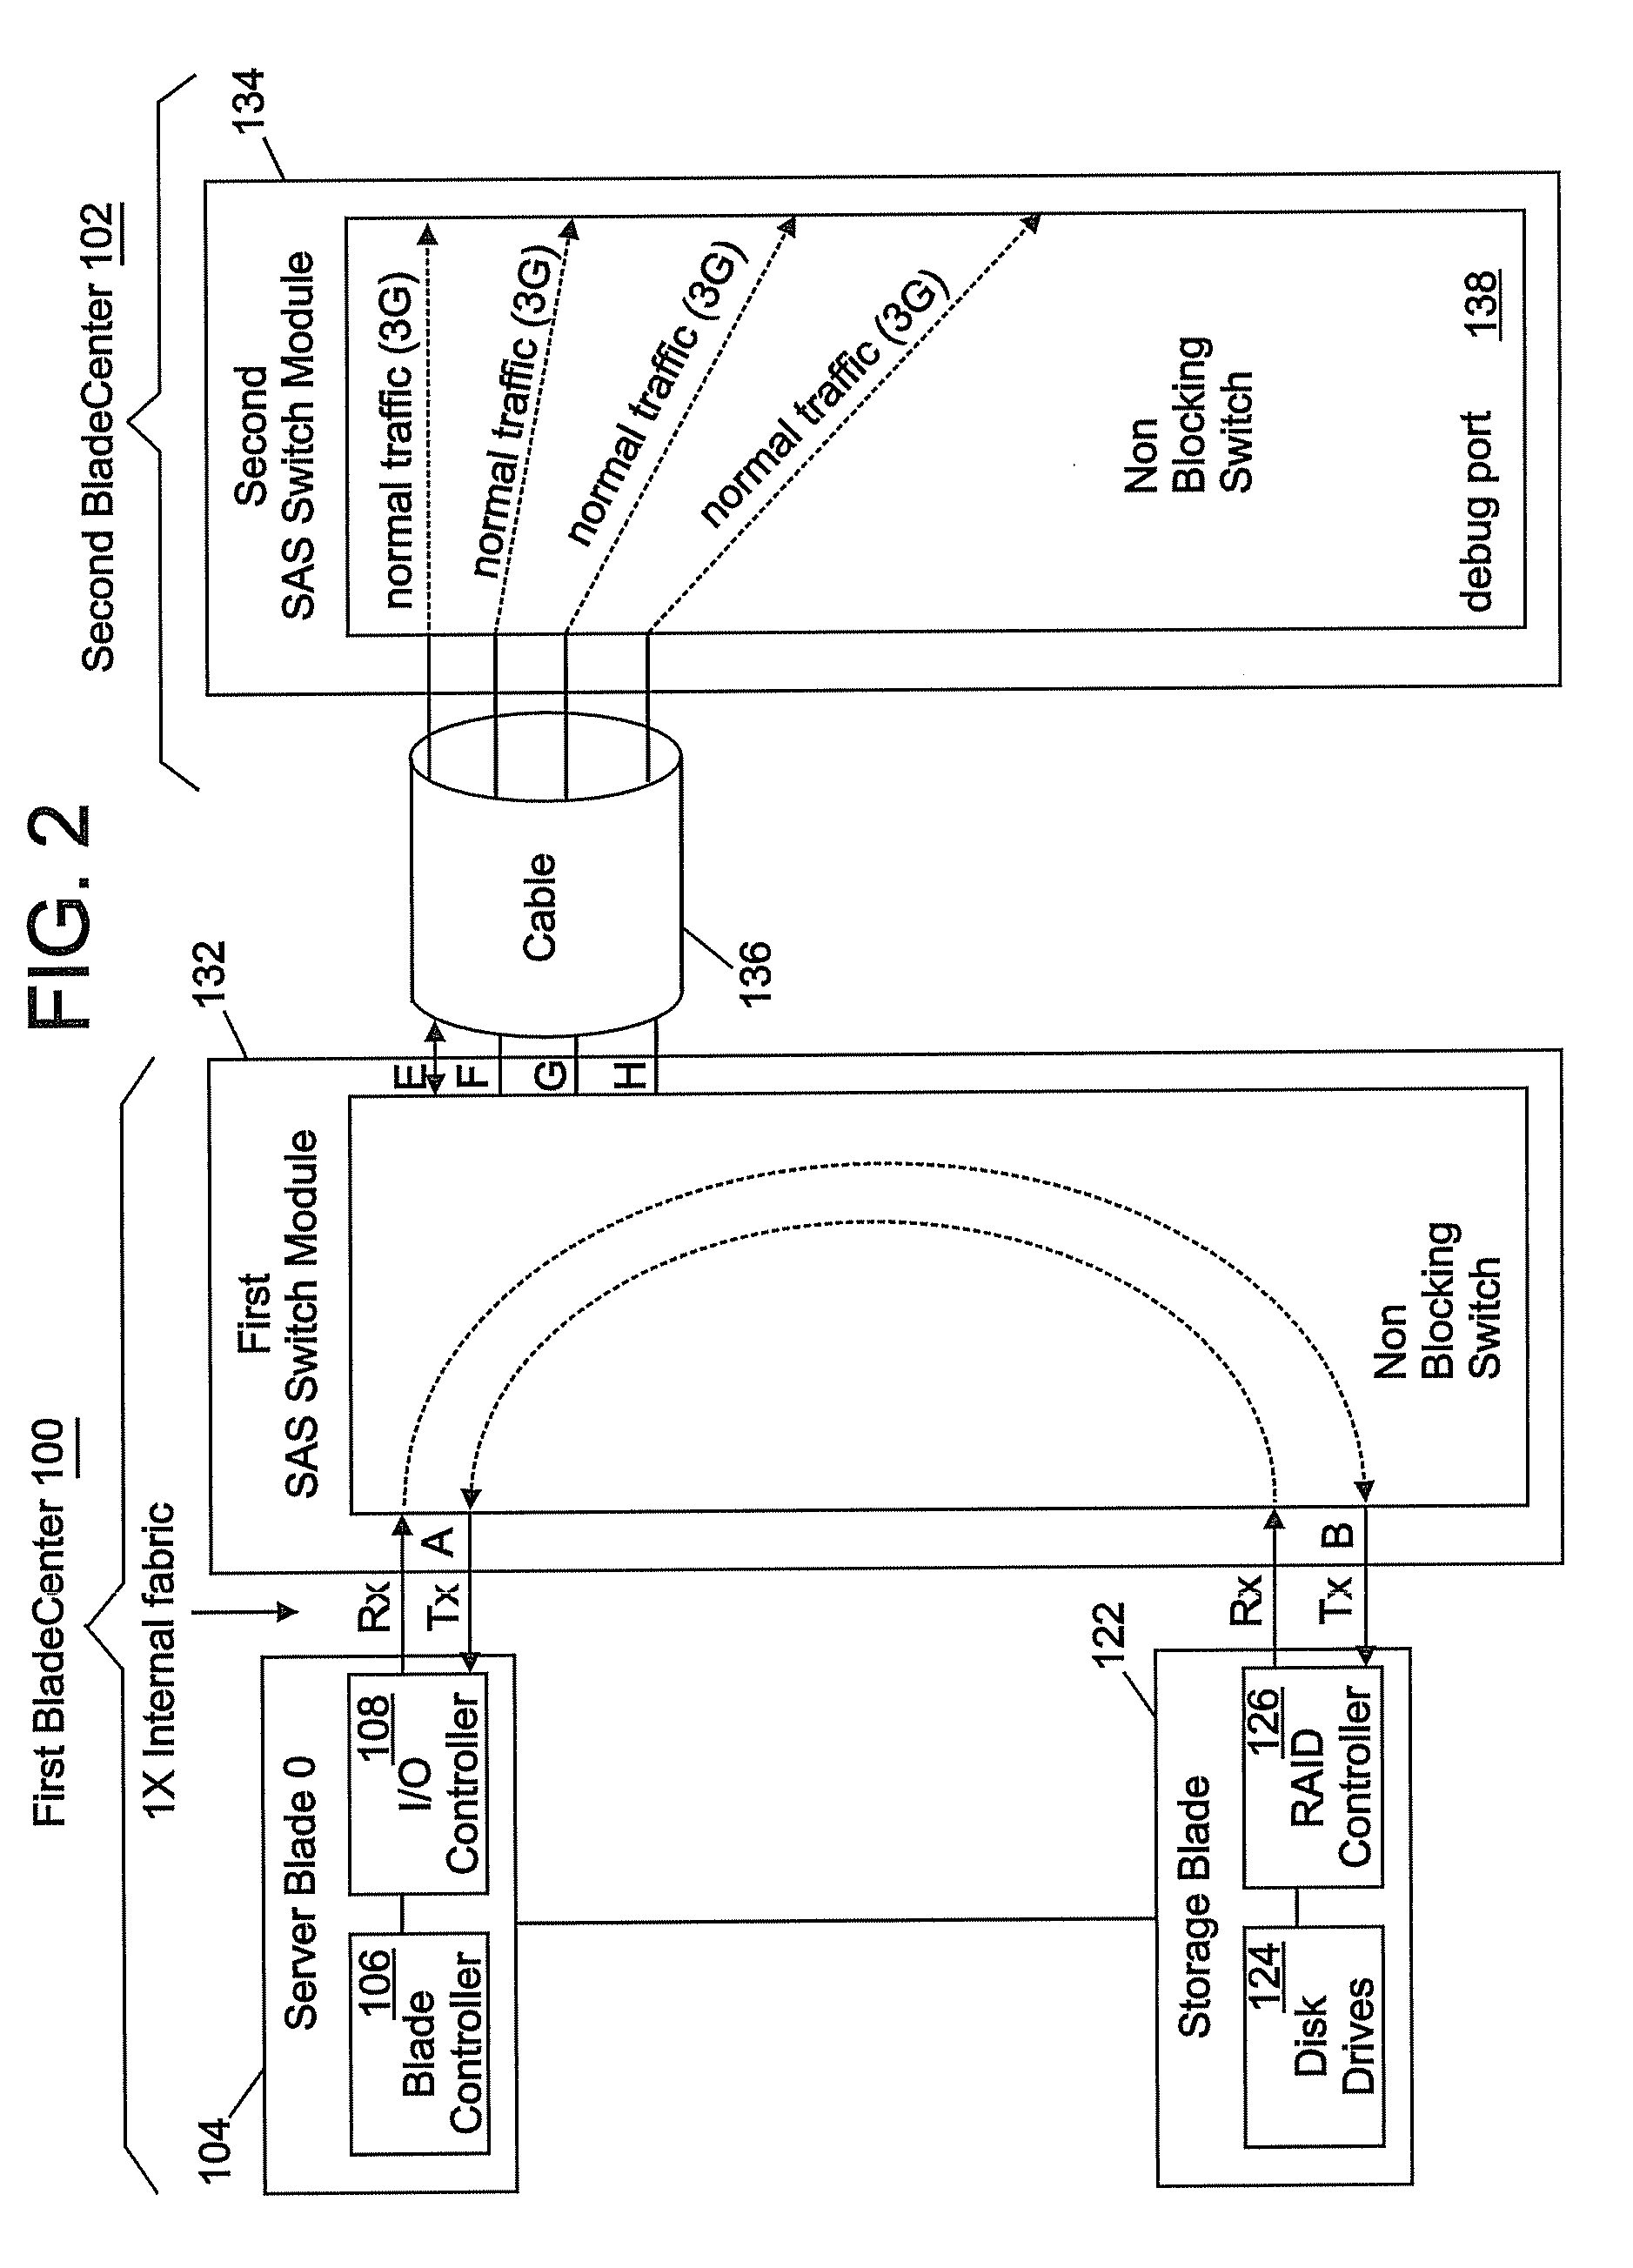 Method, system and computer program product for providing high speed fault tracing within a blade center system